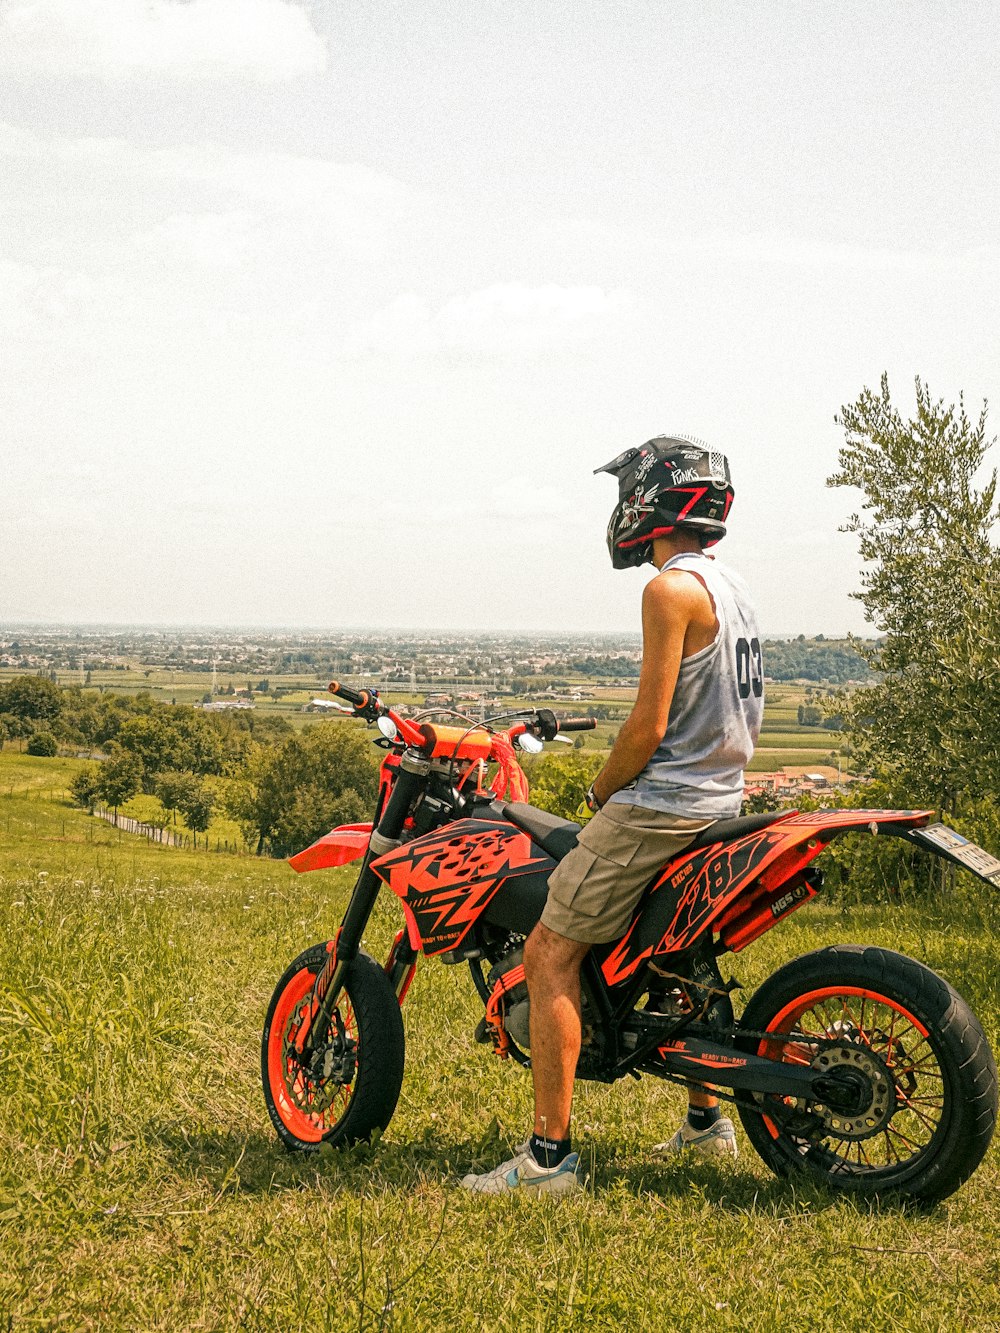 a person sitting on a dirt bike in a field